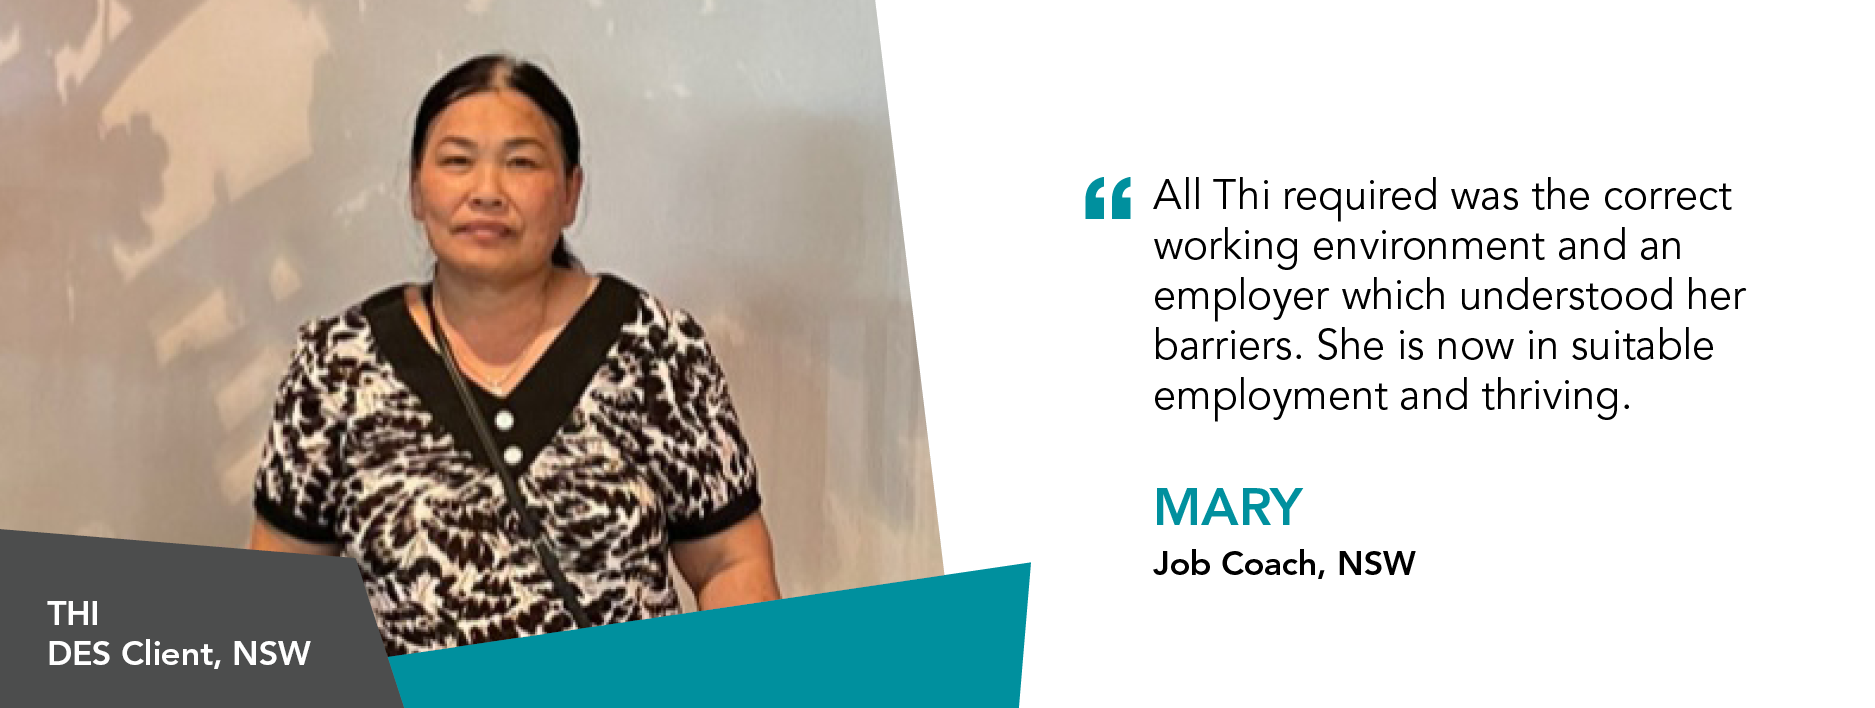 Quote says “All Thi required was the correct working environment and an employer which understood her barriers. She is now in suitable employment and thriving.” - Mary, Job Coach NSW